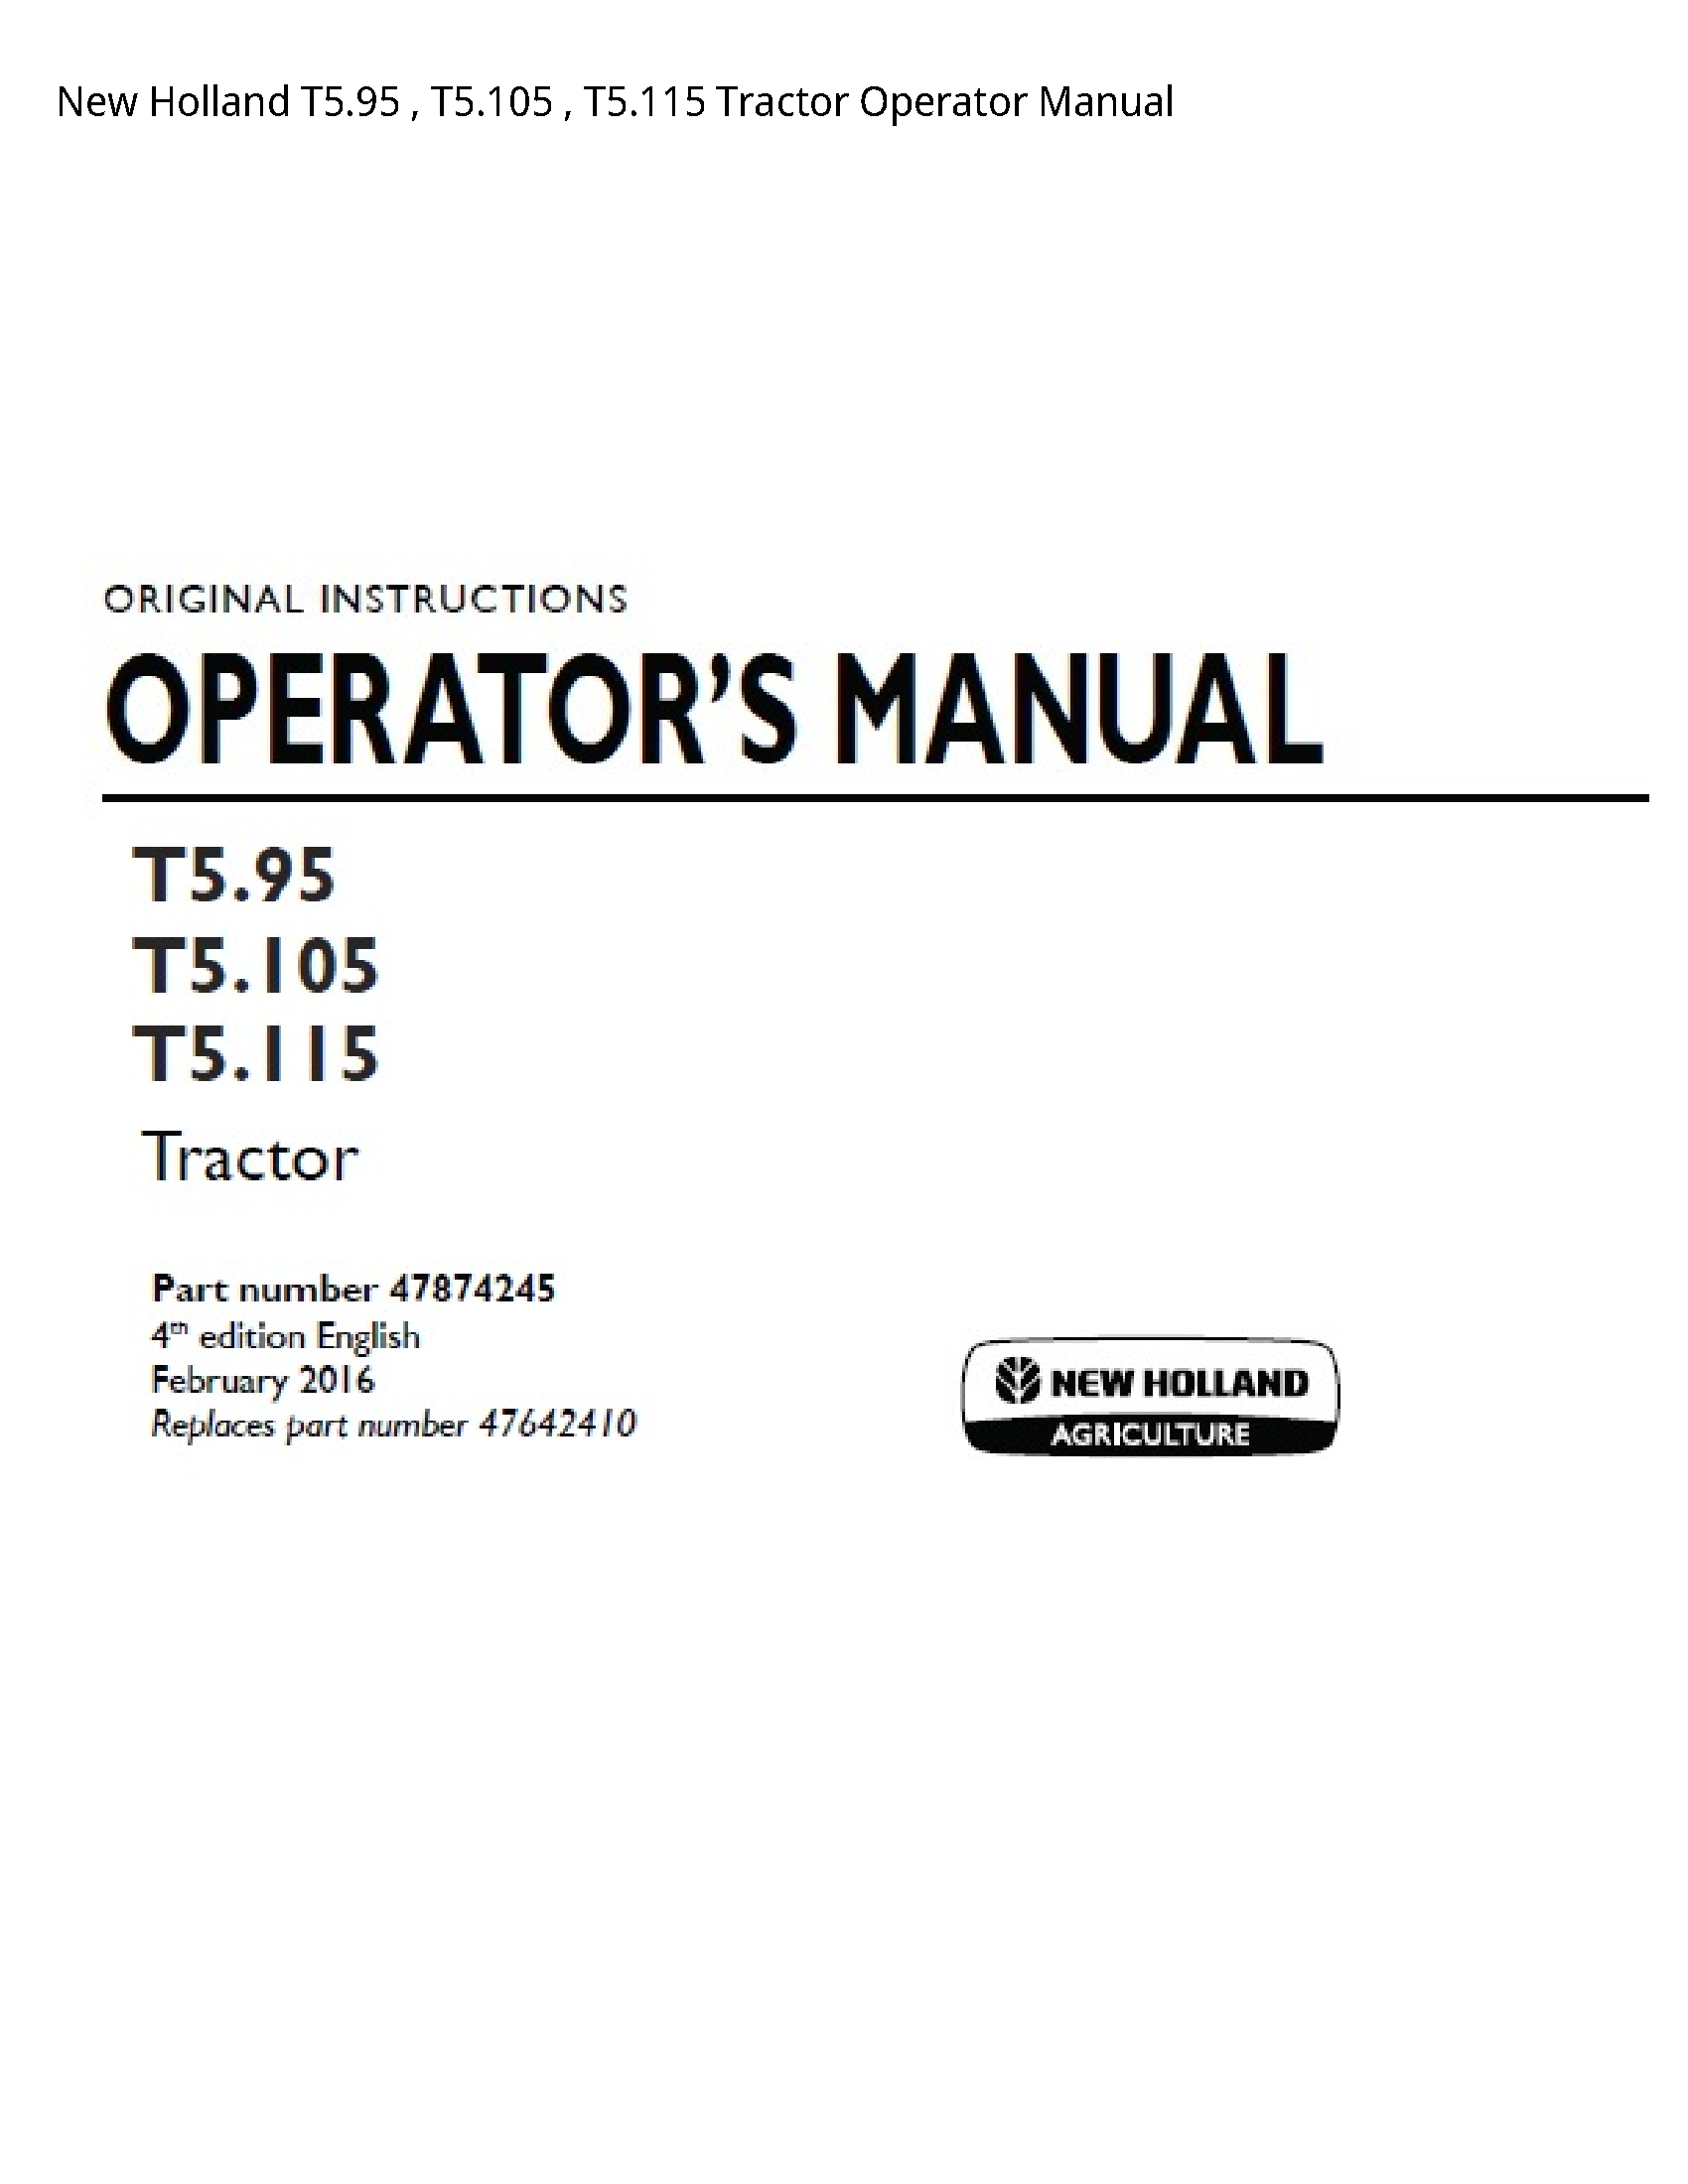 New Holland T5.95 Tractor Operator manual